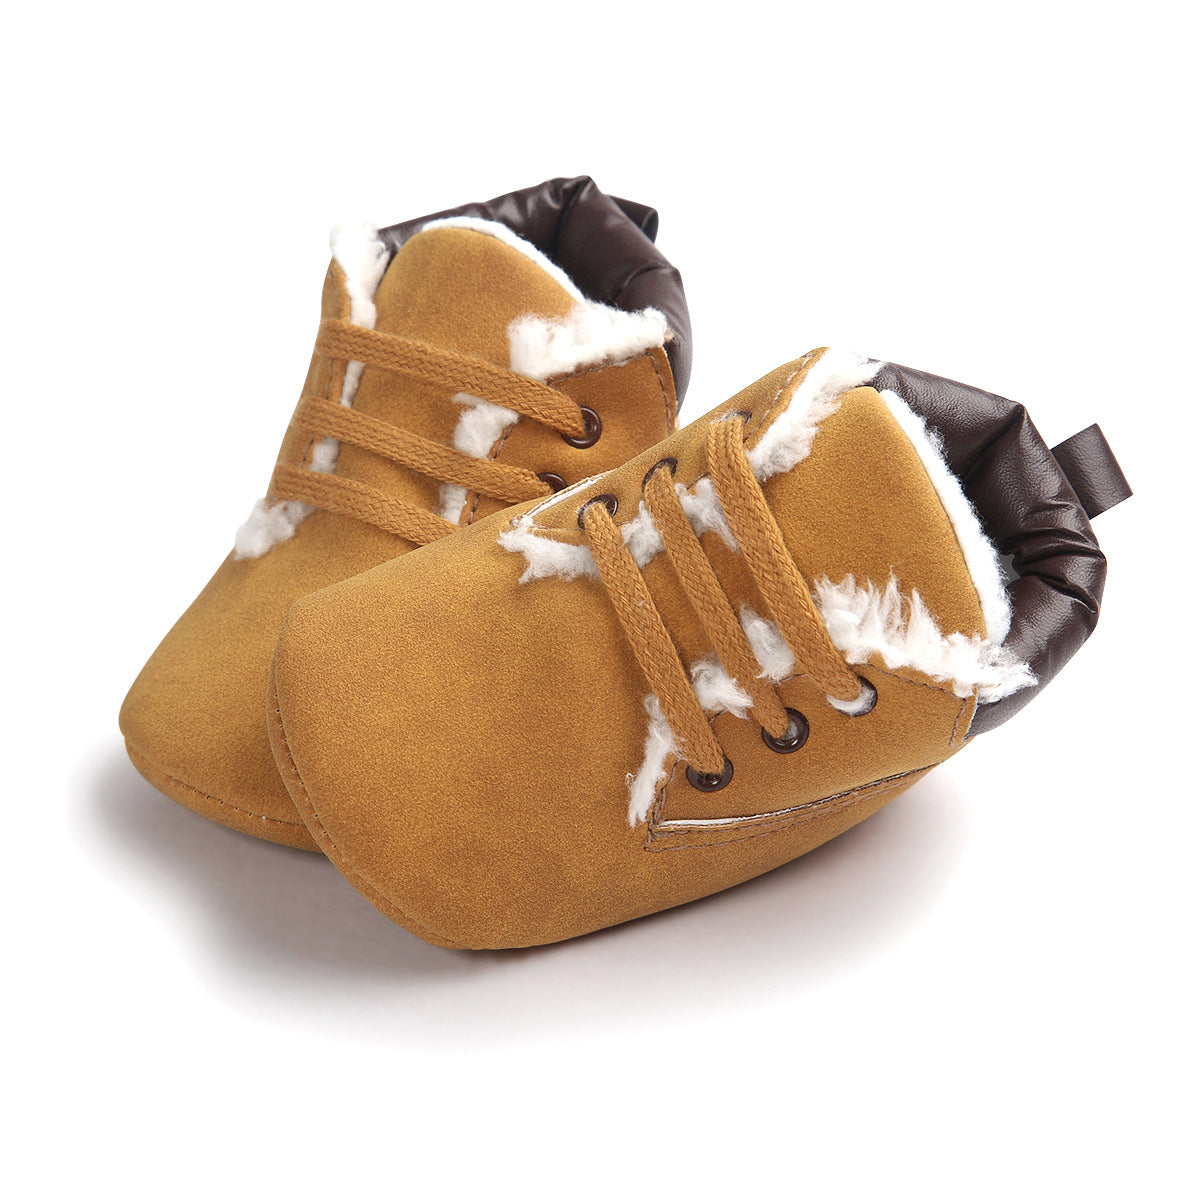 Toddler Winter Leather Sneaker